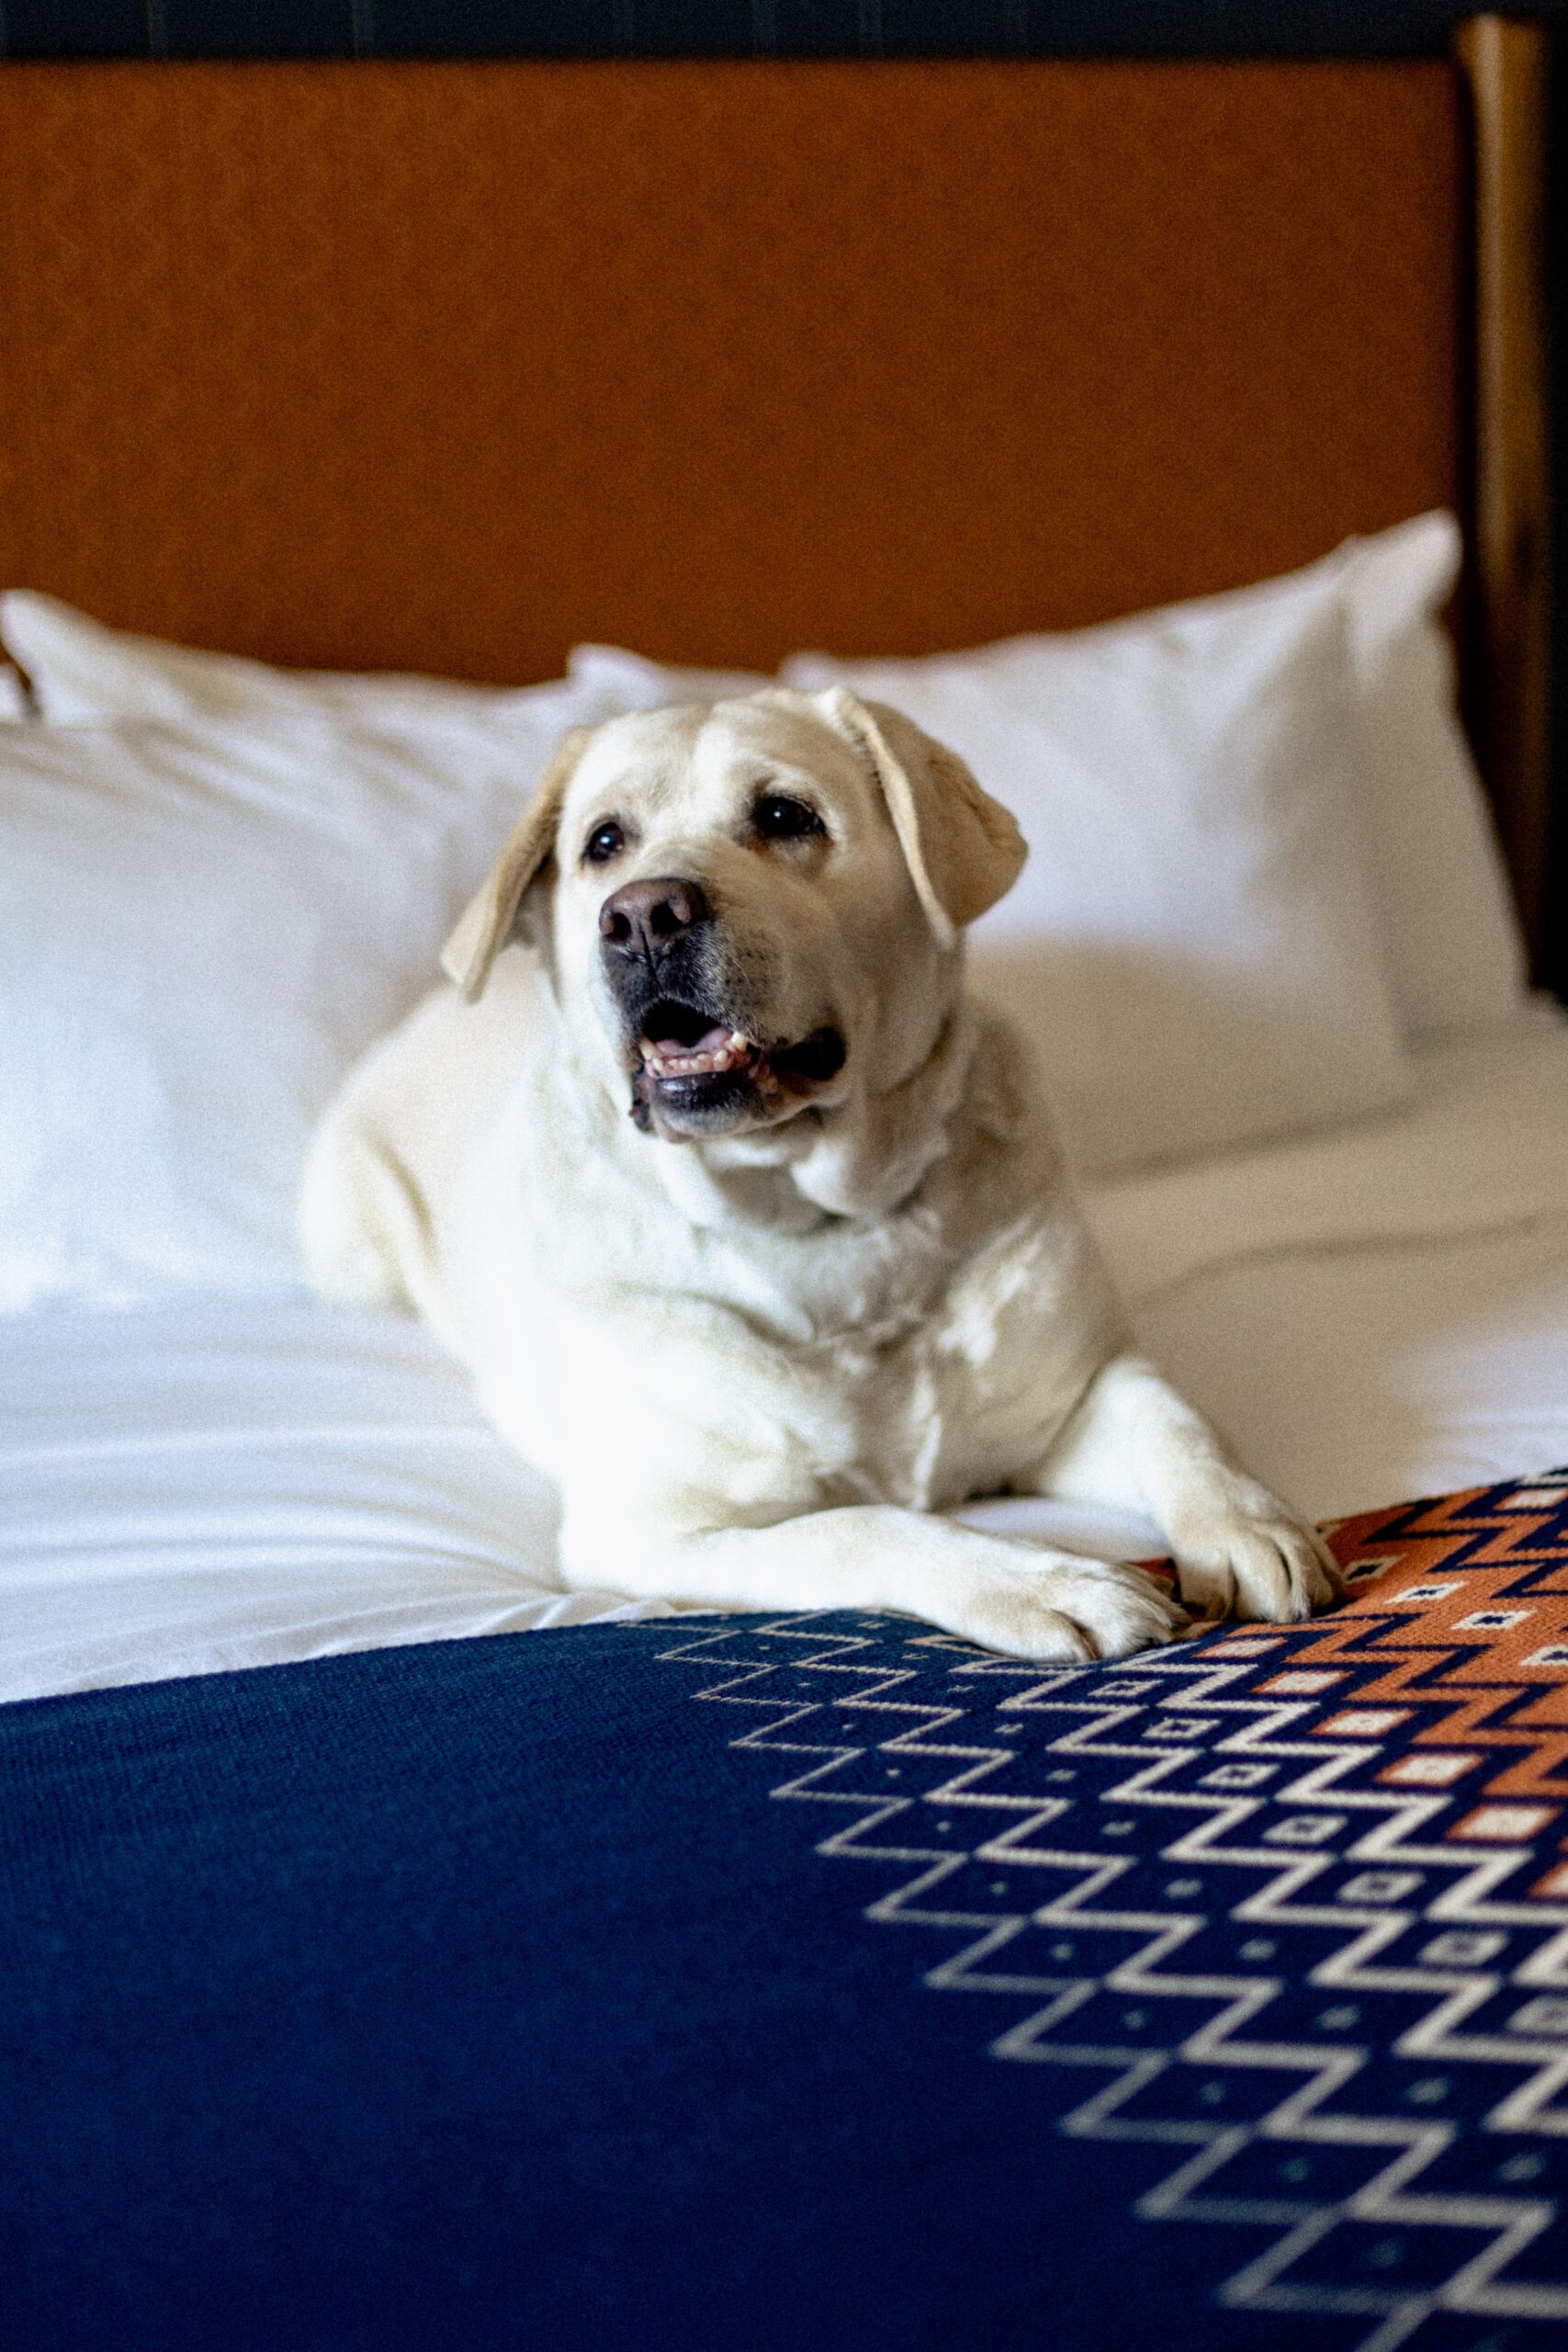 A serene moment as a white dog lounges on a comfy bed, embracing tranquility.